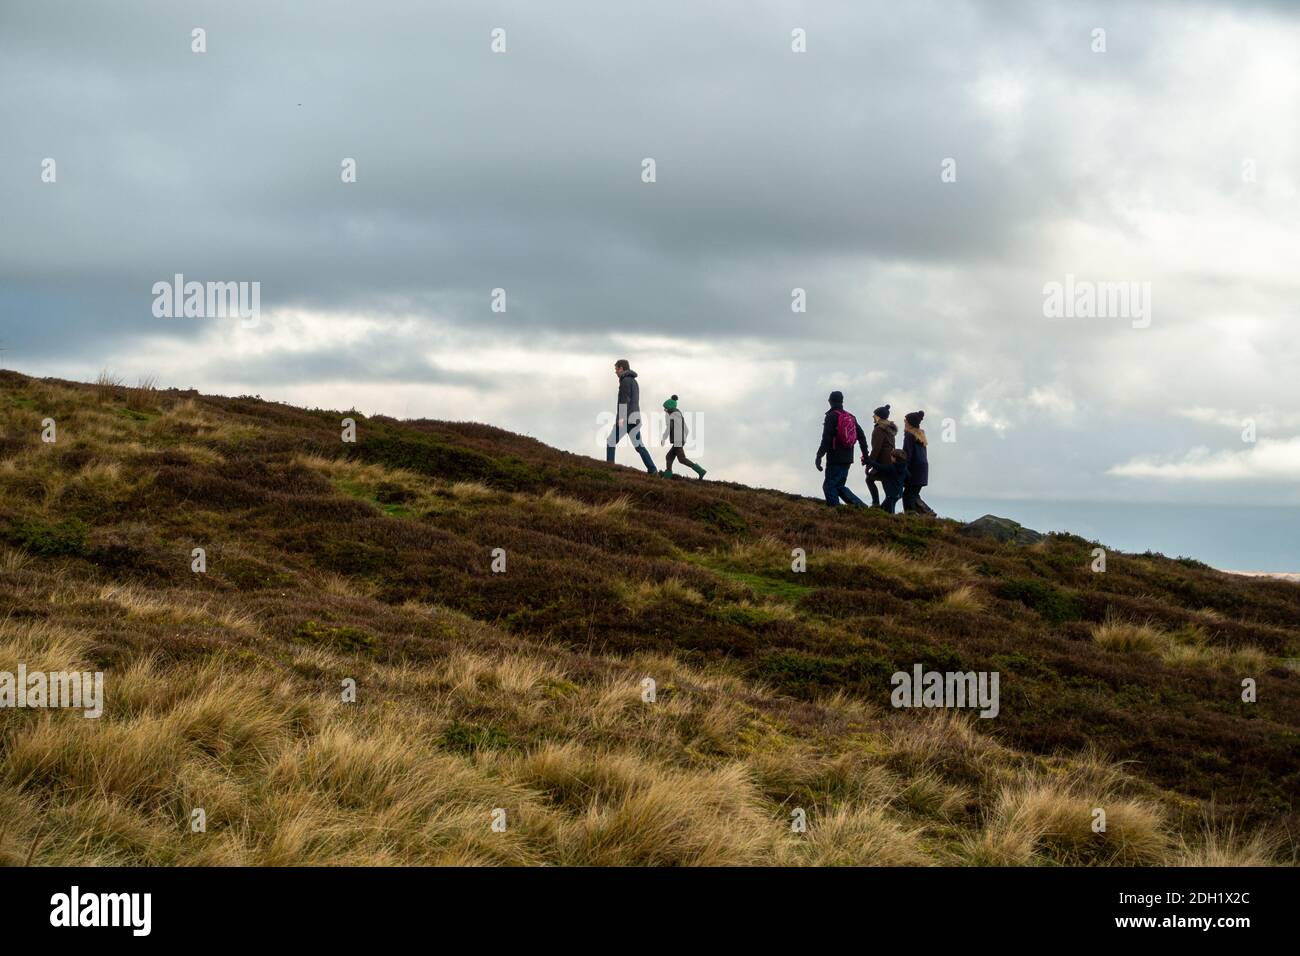 Family with children walking in moorland countryside enjoying the great outdoors, Burley Moor, Ilkley, West Yorkshire, England, UK Stock Photo